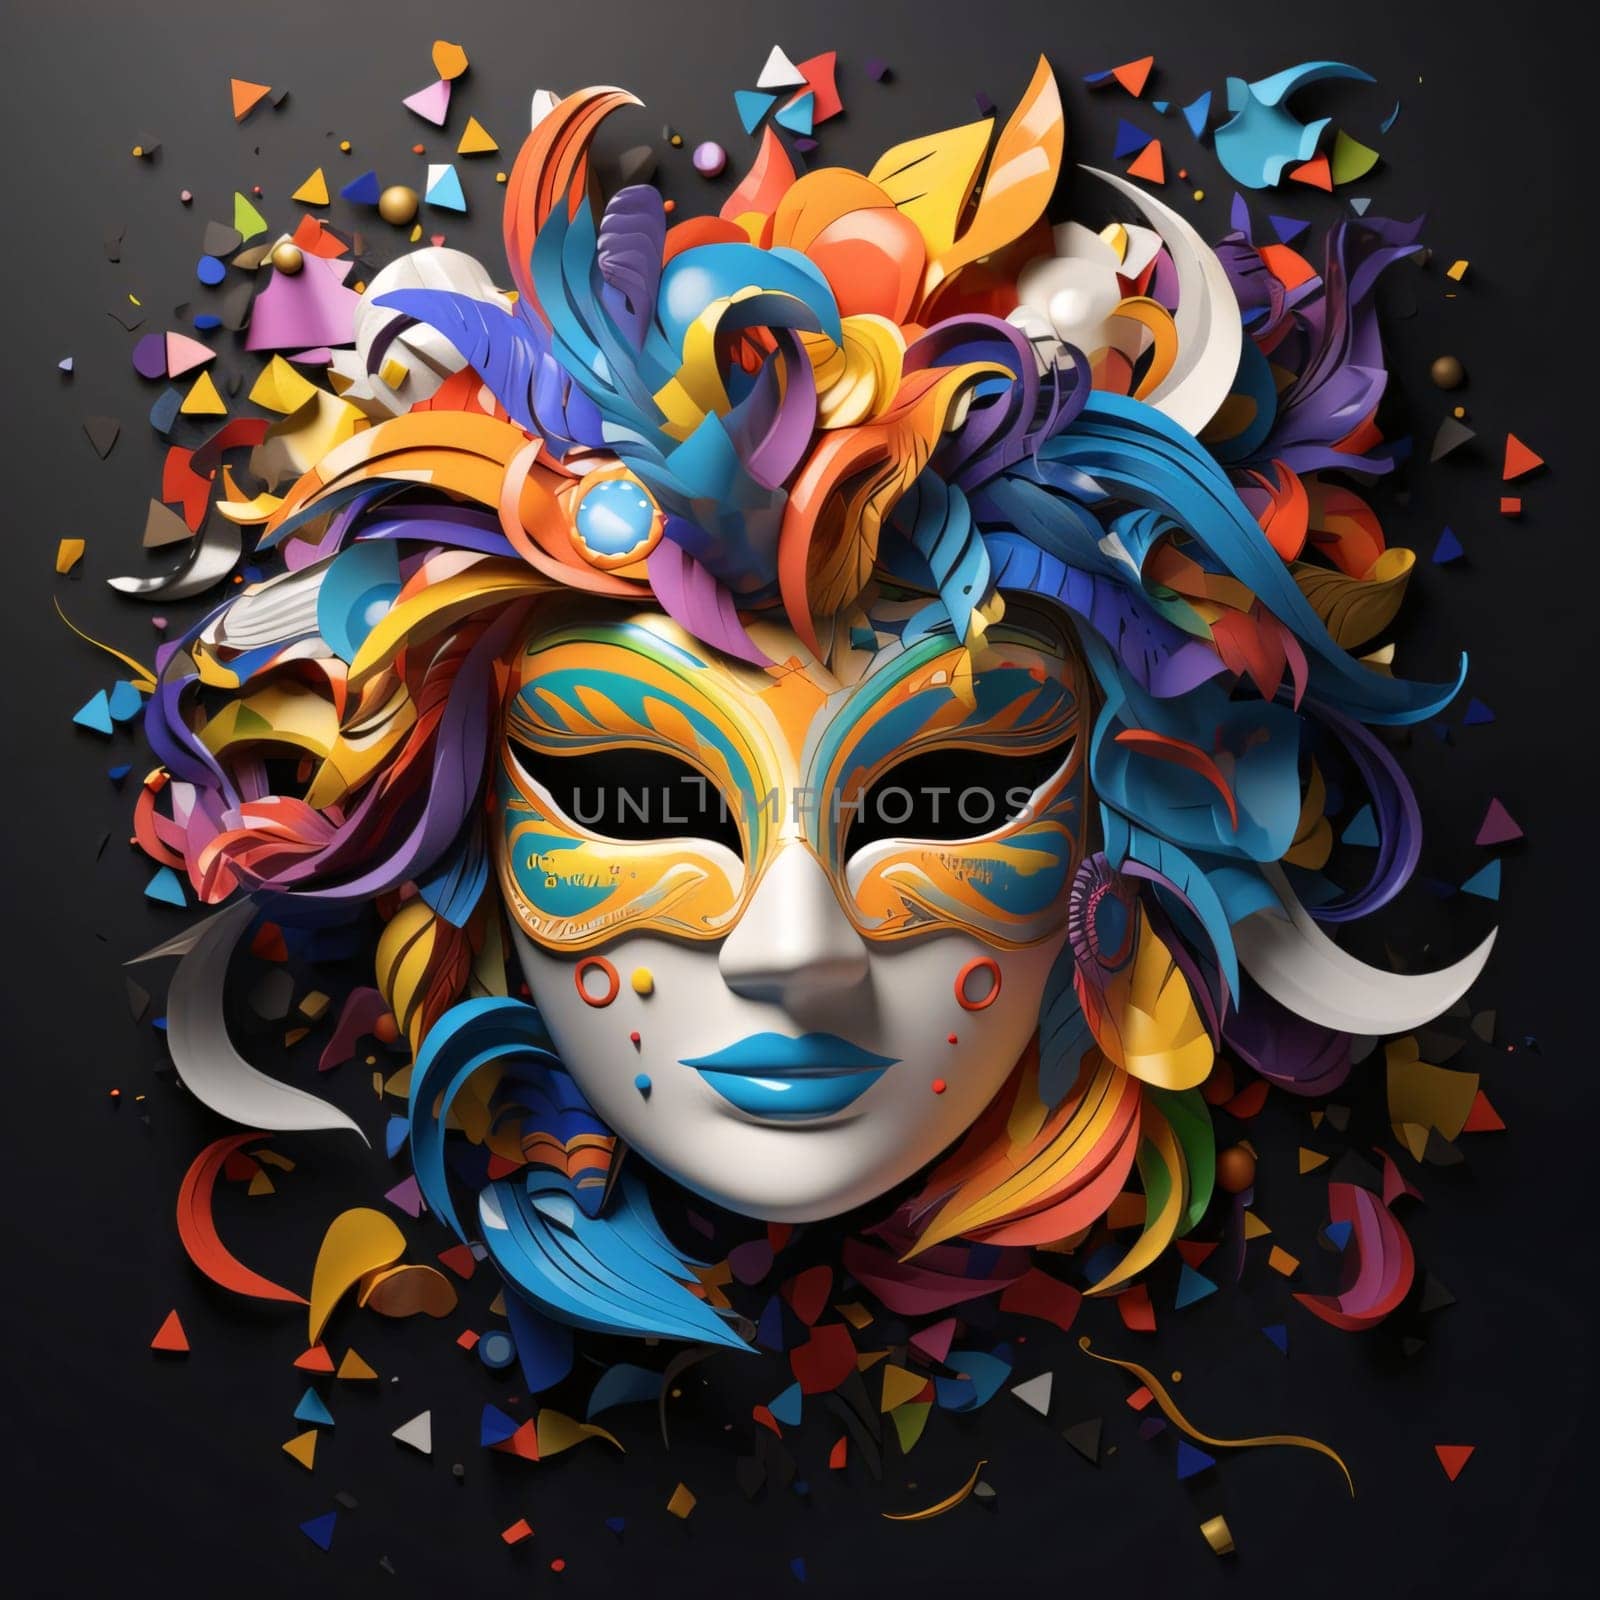 Colorful carnival mask with triangular confetti on dark background. Carnival outfits, masks and decorations. A time of fun and celebration before the fast.